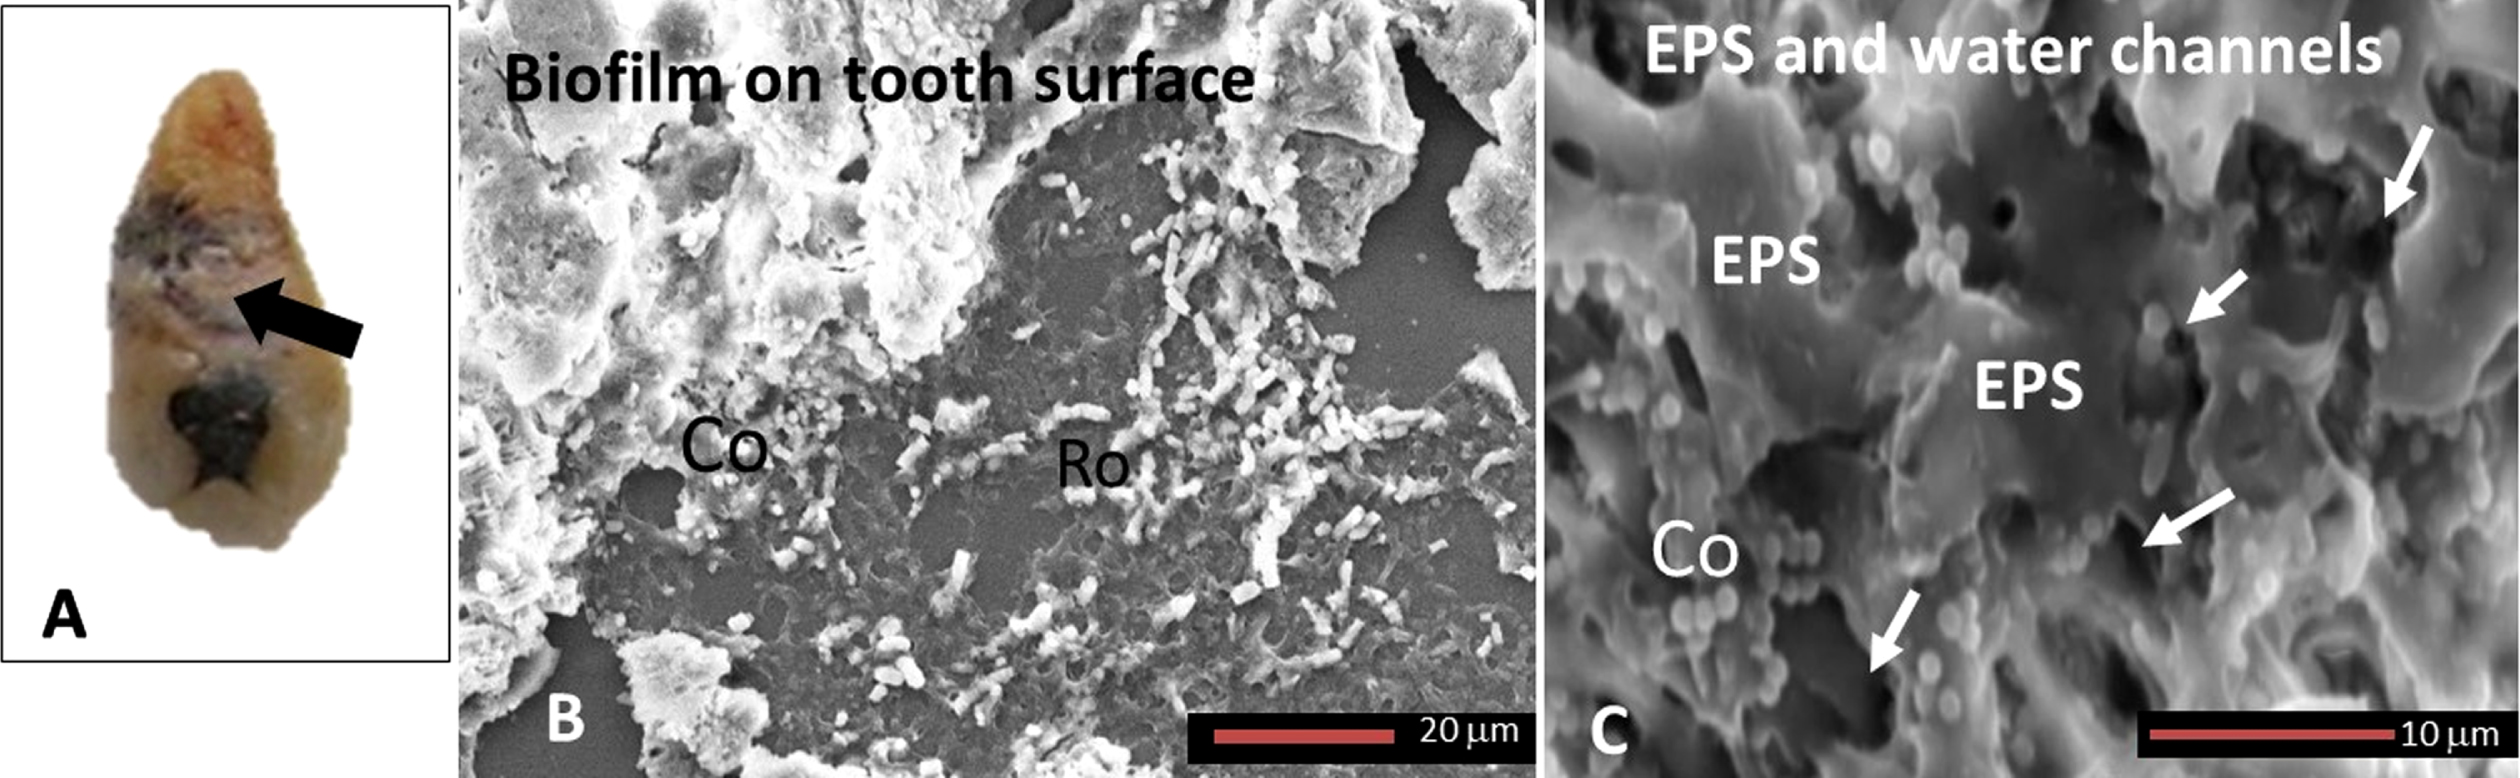 Calculus on a tooth’s external surface for biofilm characteristics. A) Macroscopic image of an extracted tooth (black arrow) to show calculus and plaque deposits on the external root surface. B) SEM images of the calculus deposits from the external tooth root surface shown in A revealed a polymicrobial biofilm composed mainly of cocci (Co) and rod (Ro) shaped bacteria. C) The biofilm shows extracellular polymeric substance (EPS) with smooth appearance on which cocci (Co) shaped bacteria are clearly visible with the occasional rod (Ro) shaped bacterium. Smooth EPS demonstrated an abundance of water channels with variable openings as indicated by white arrows. Magnification as per micron bar.